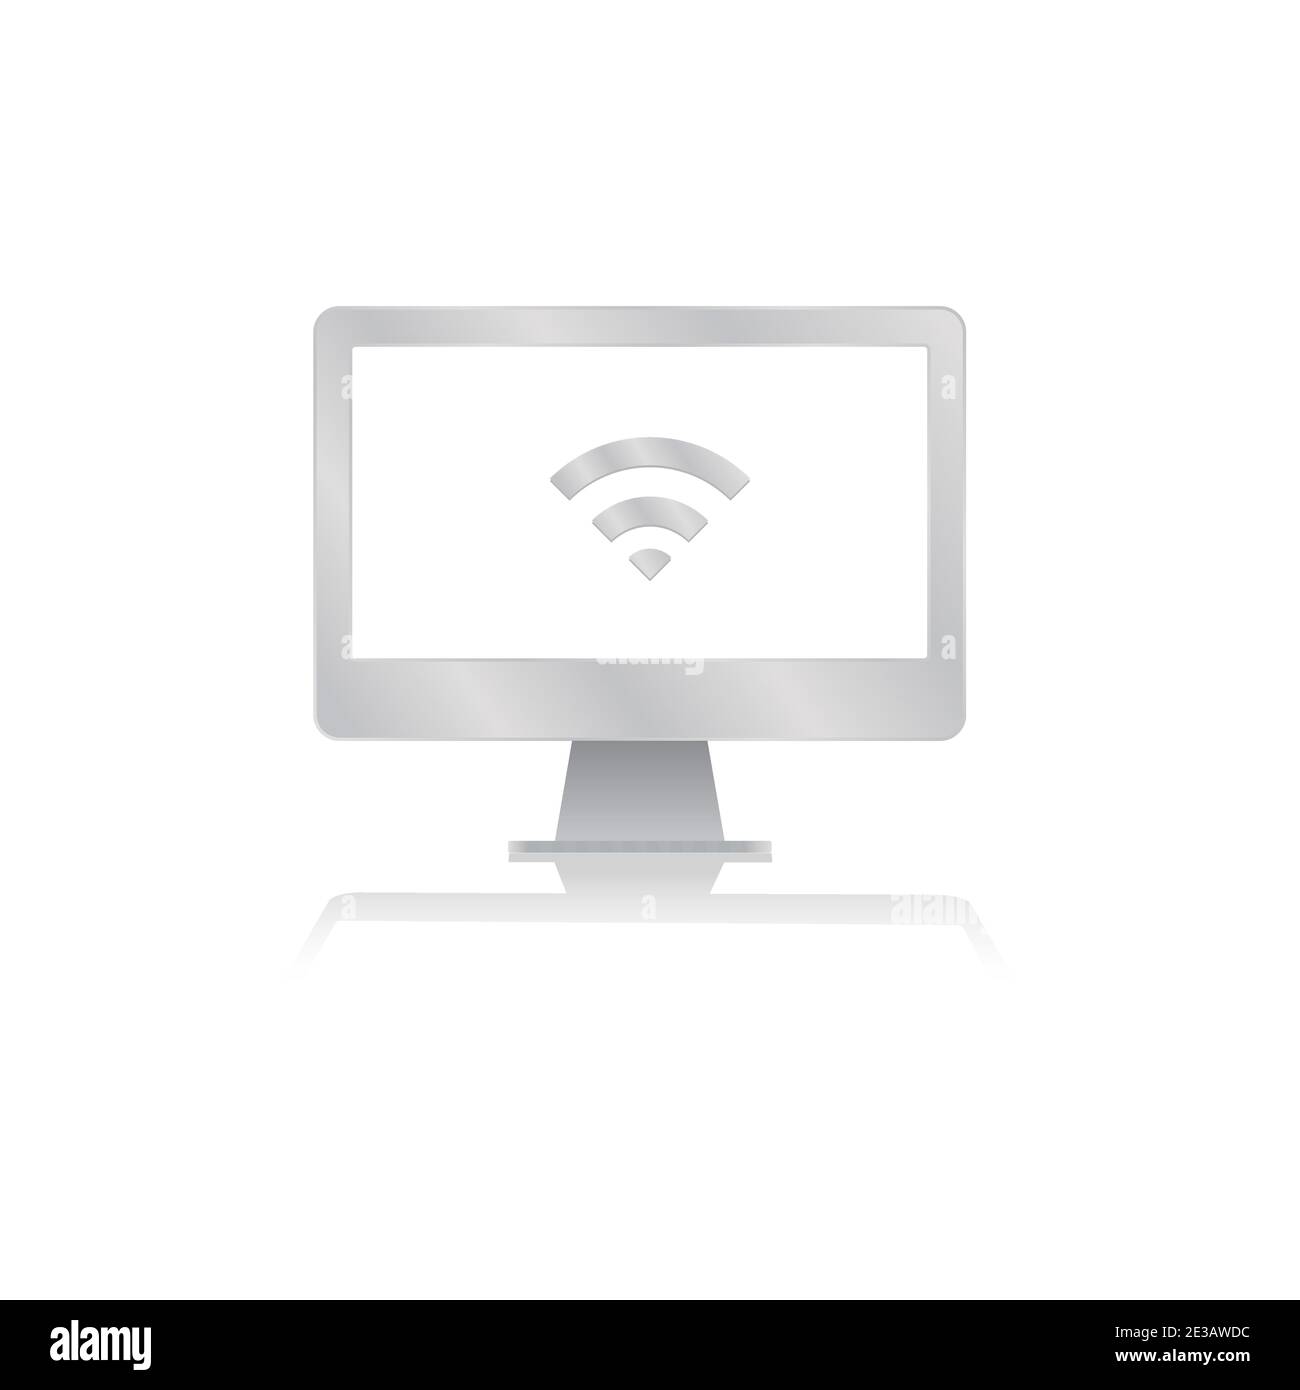 wifi internet connection inside blank screen computer monitor with reflection minimalist modern icon vector illustration Stock Vector